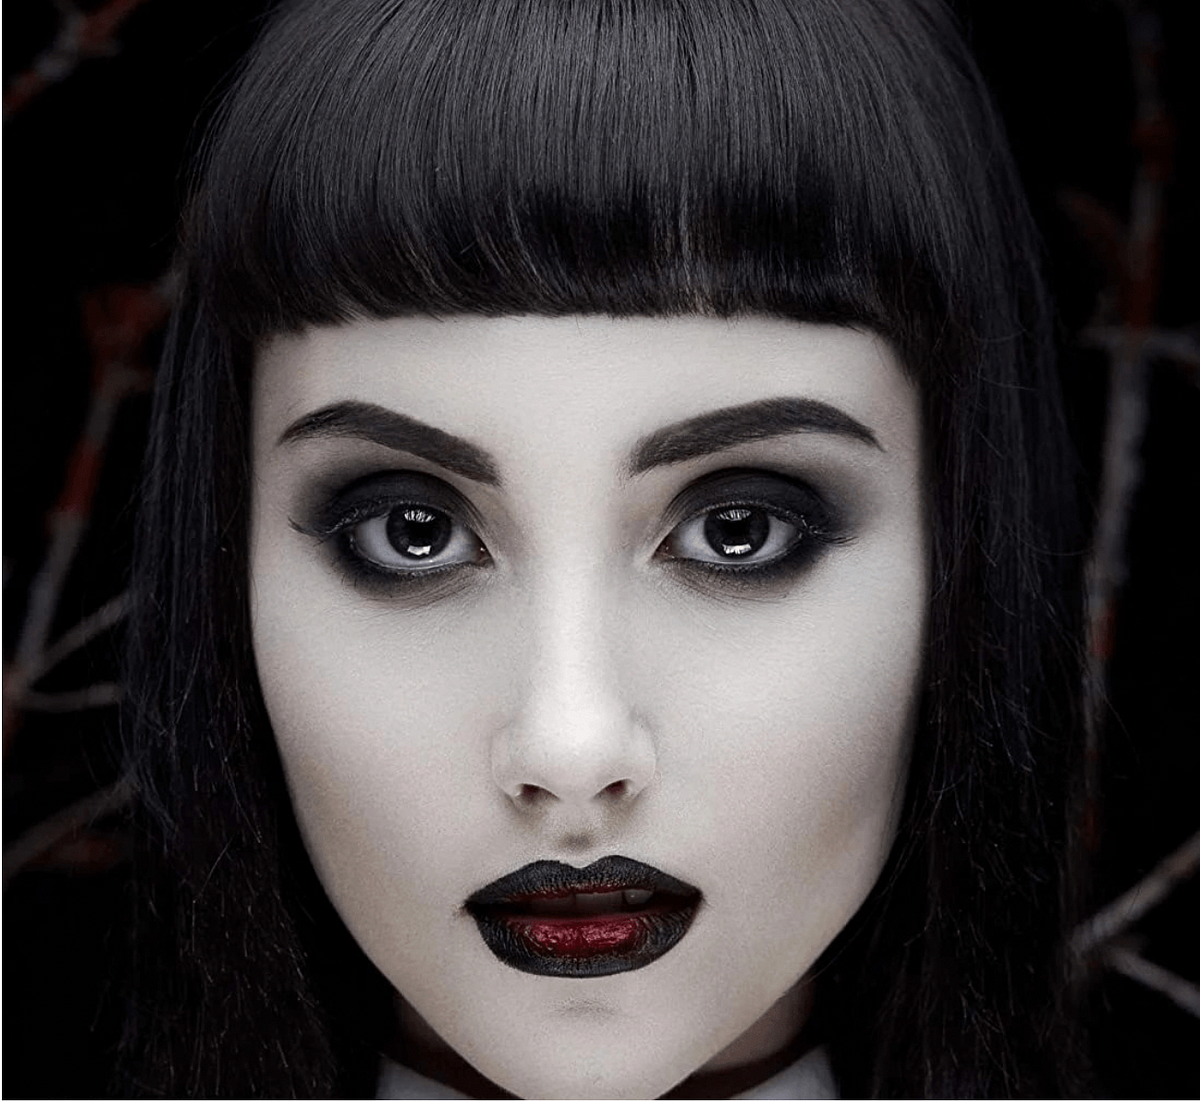 Any tips on how to make a DIY white foundation? : r/GothFashion